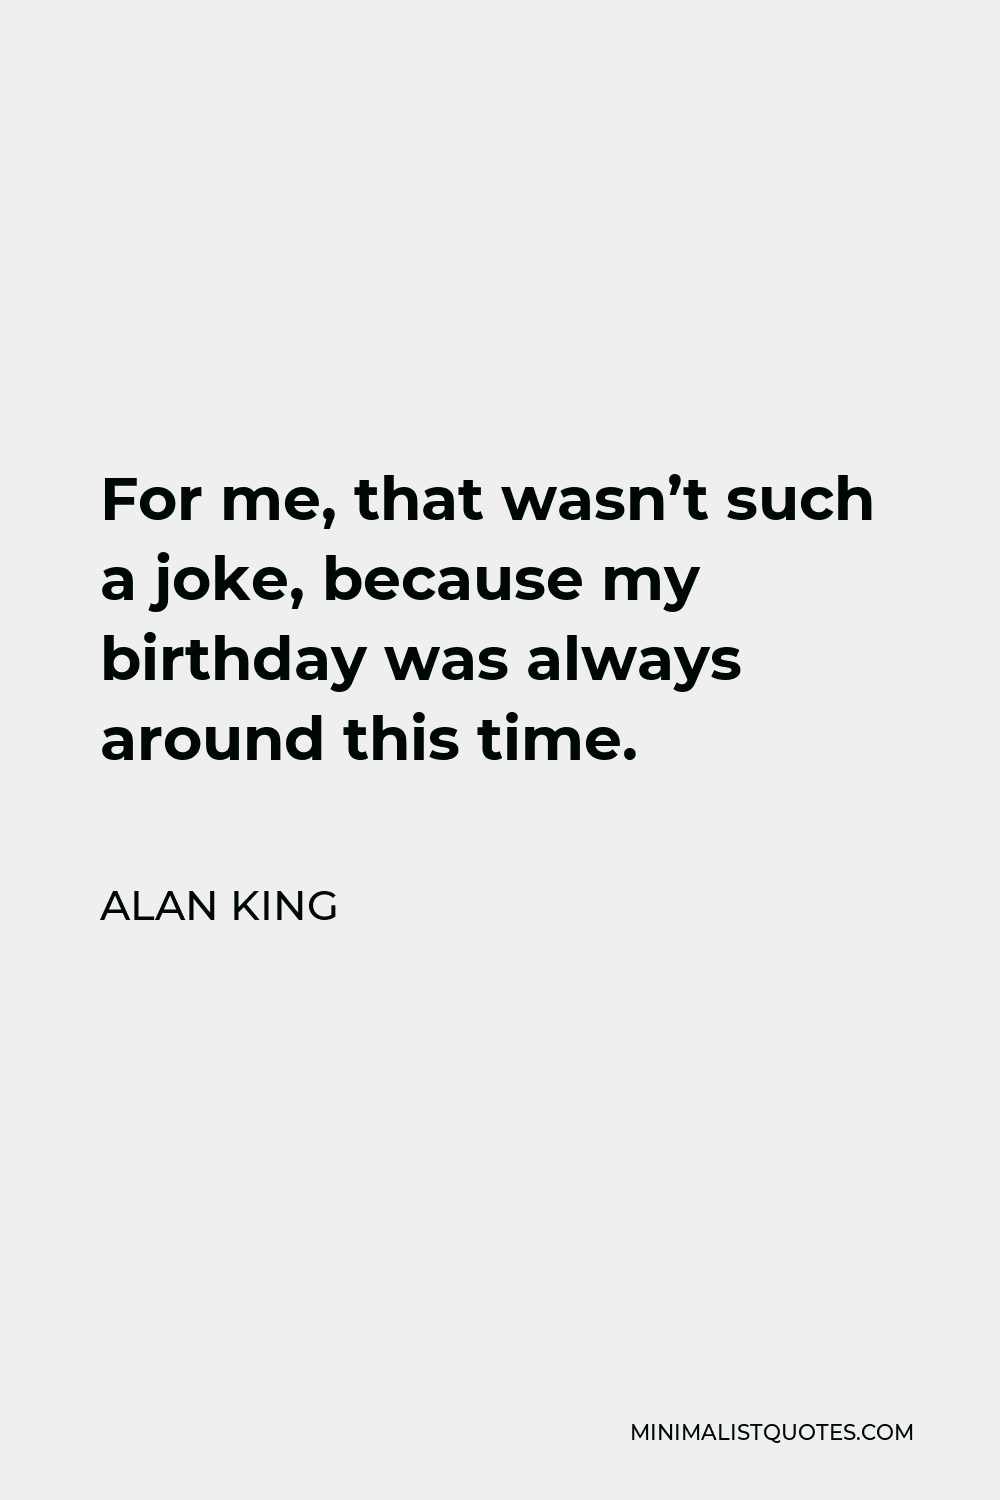 Alan King Quote - For me, that wasn’t such a joke, because my birthday was always around this time.